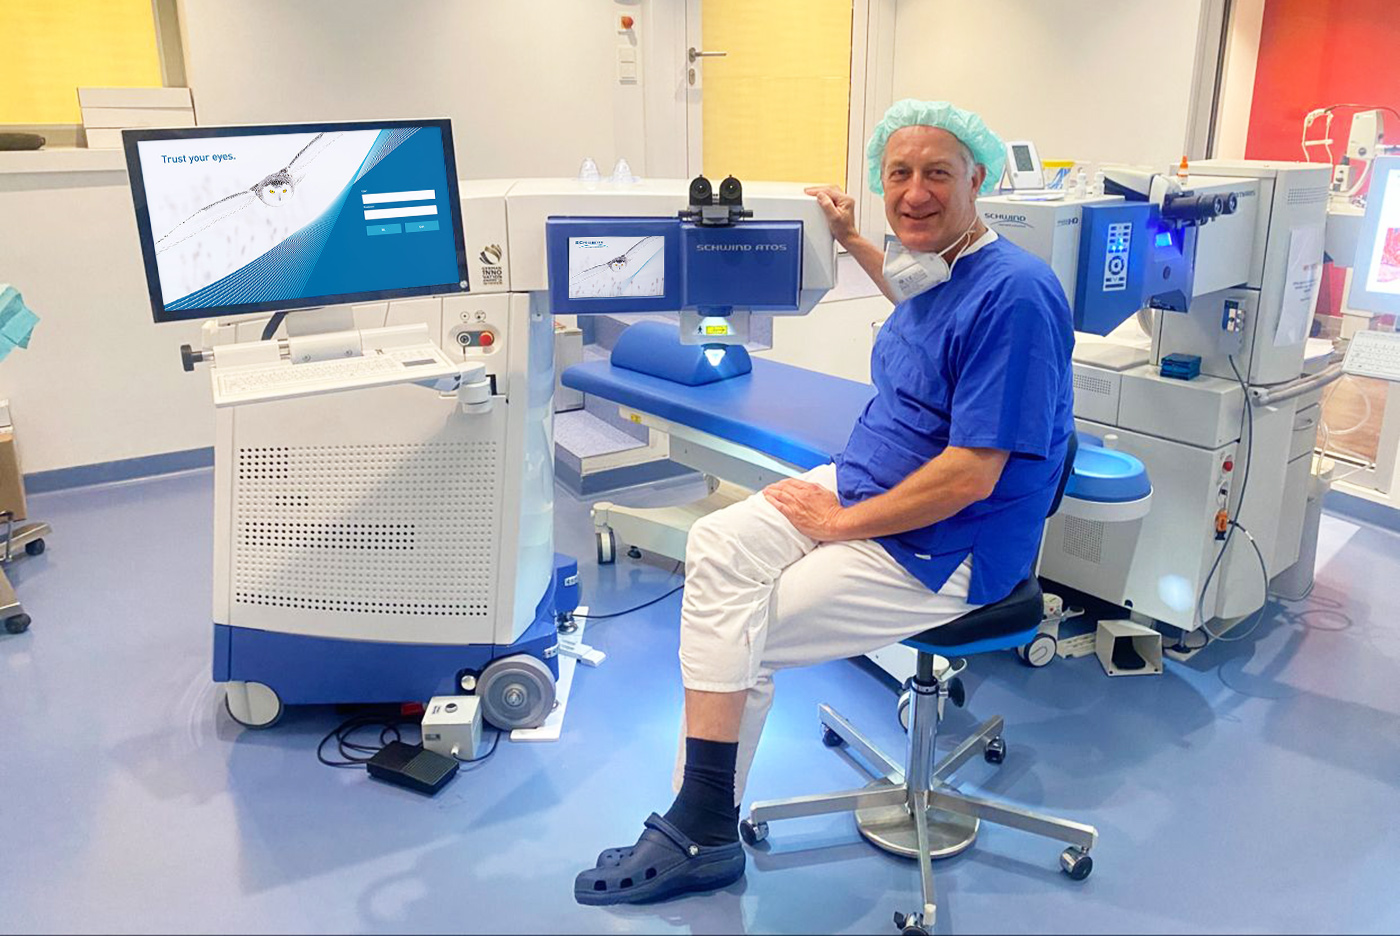 EuroEyes is again a technical pioneer – First ReLEx Smile treatment with the Atos femtosecond laser in Germany!